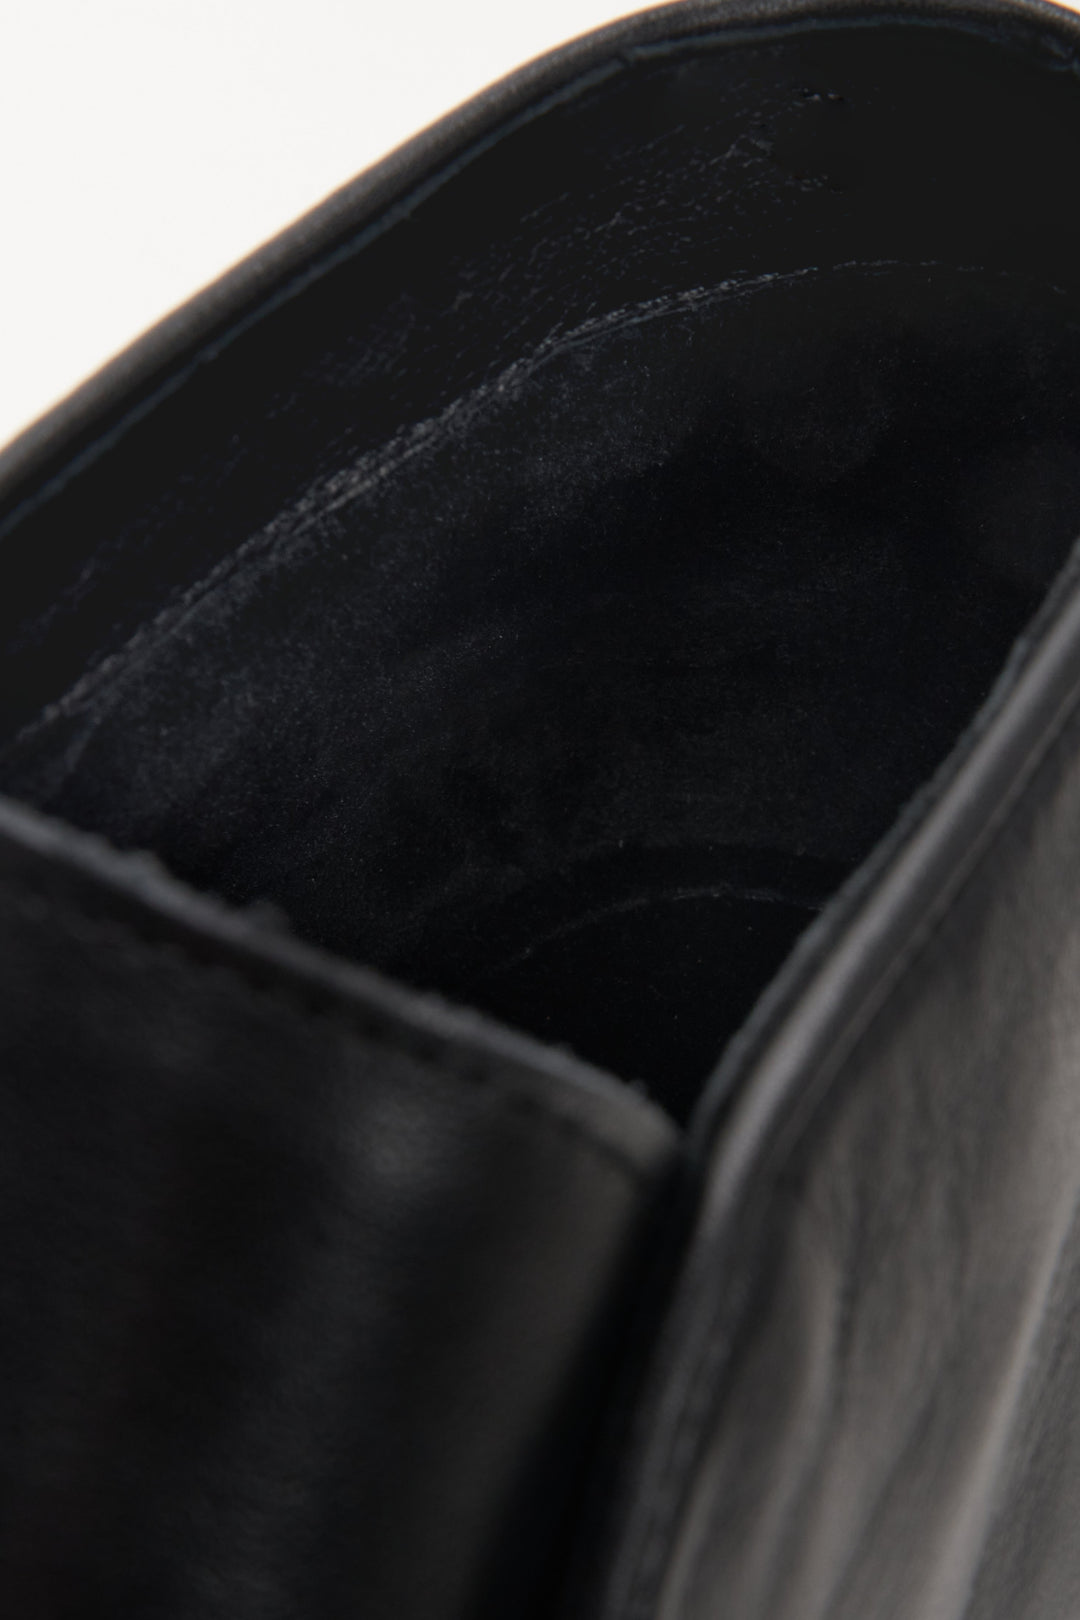 Soft black leather men's boots for fall by Estro - close-up on the interior details of the model.